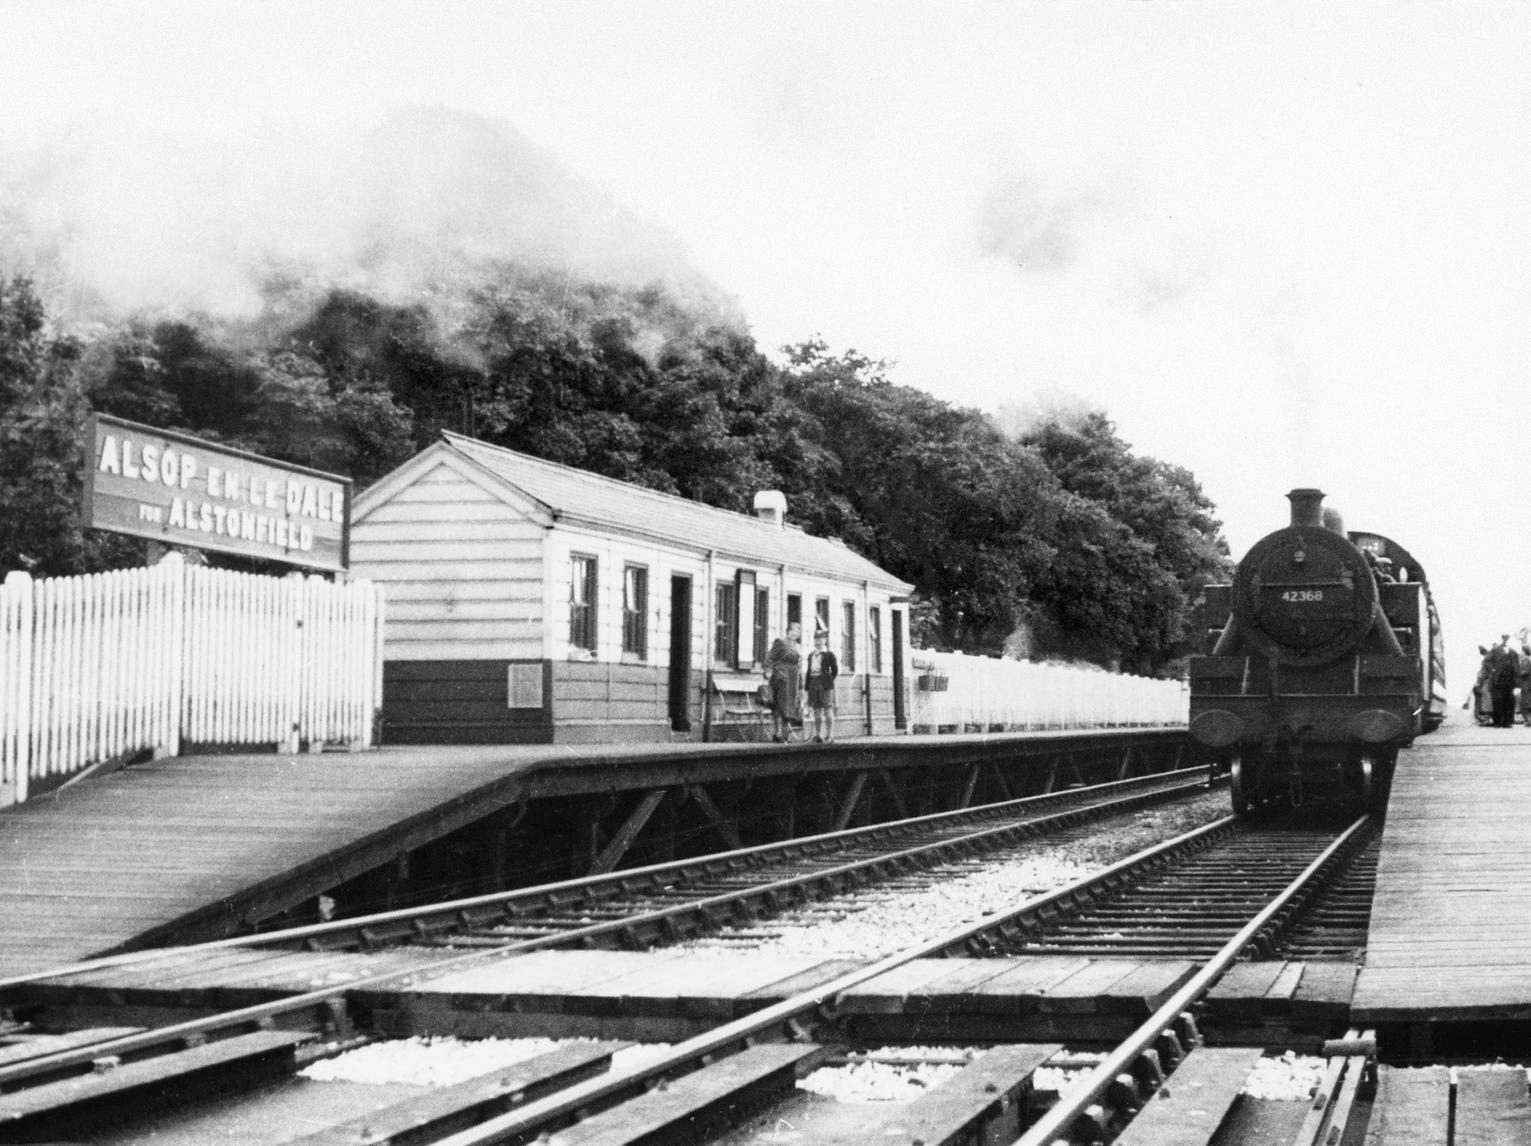 A service from Uttoxeter to Buxton at Alsop-en-le-Dale, August 1953.